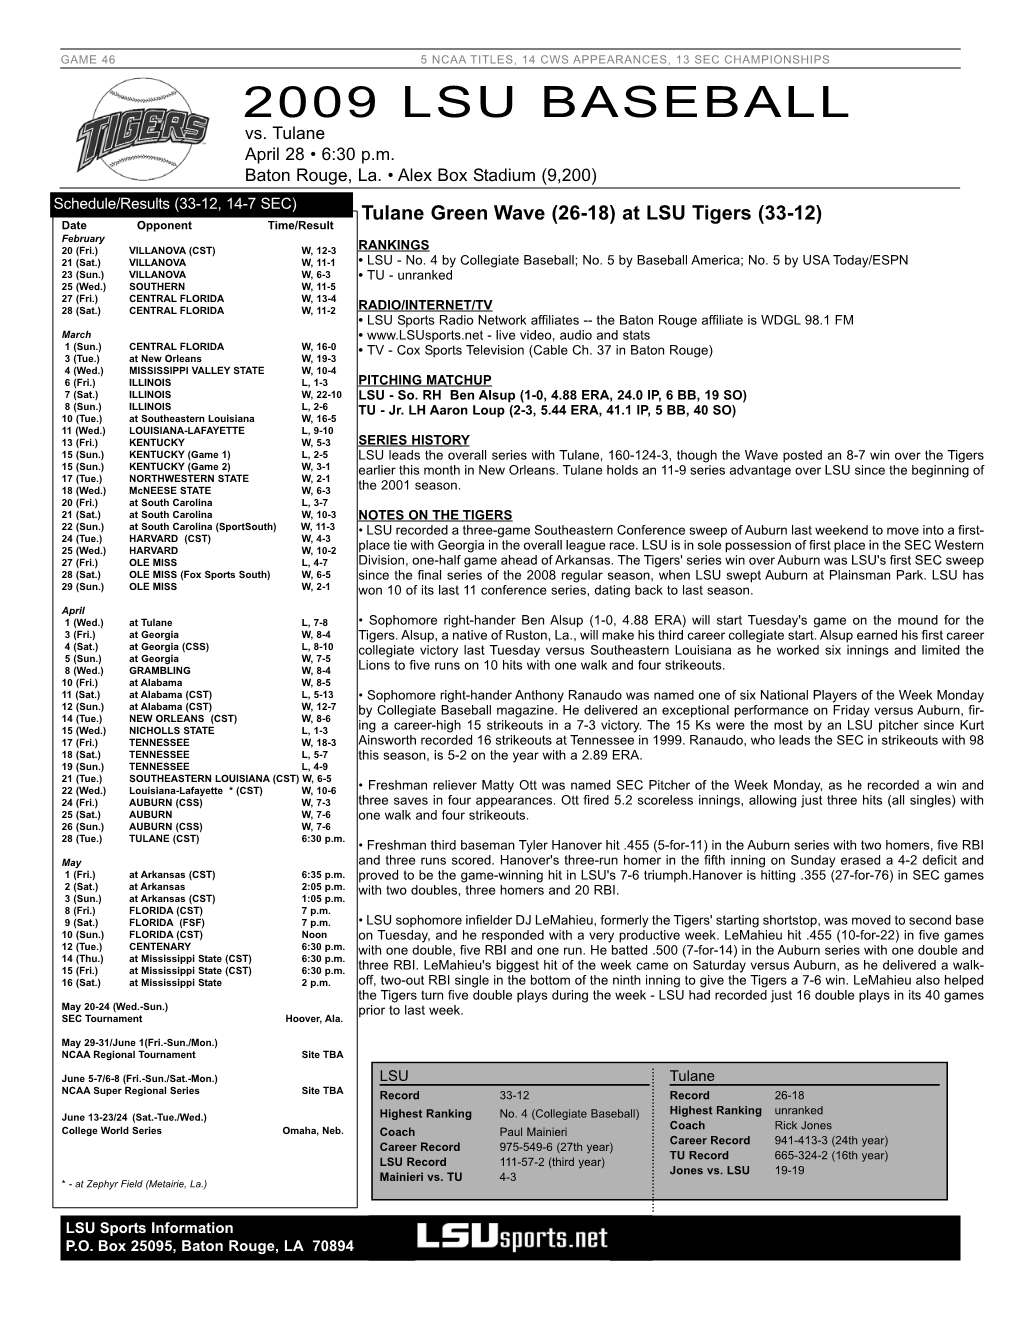 Copy of Game Notes